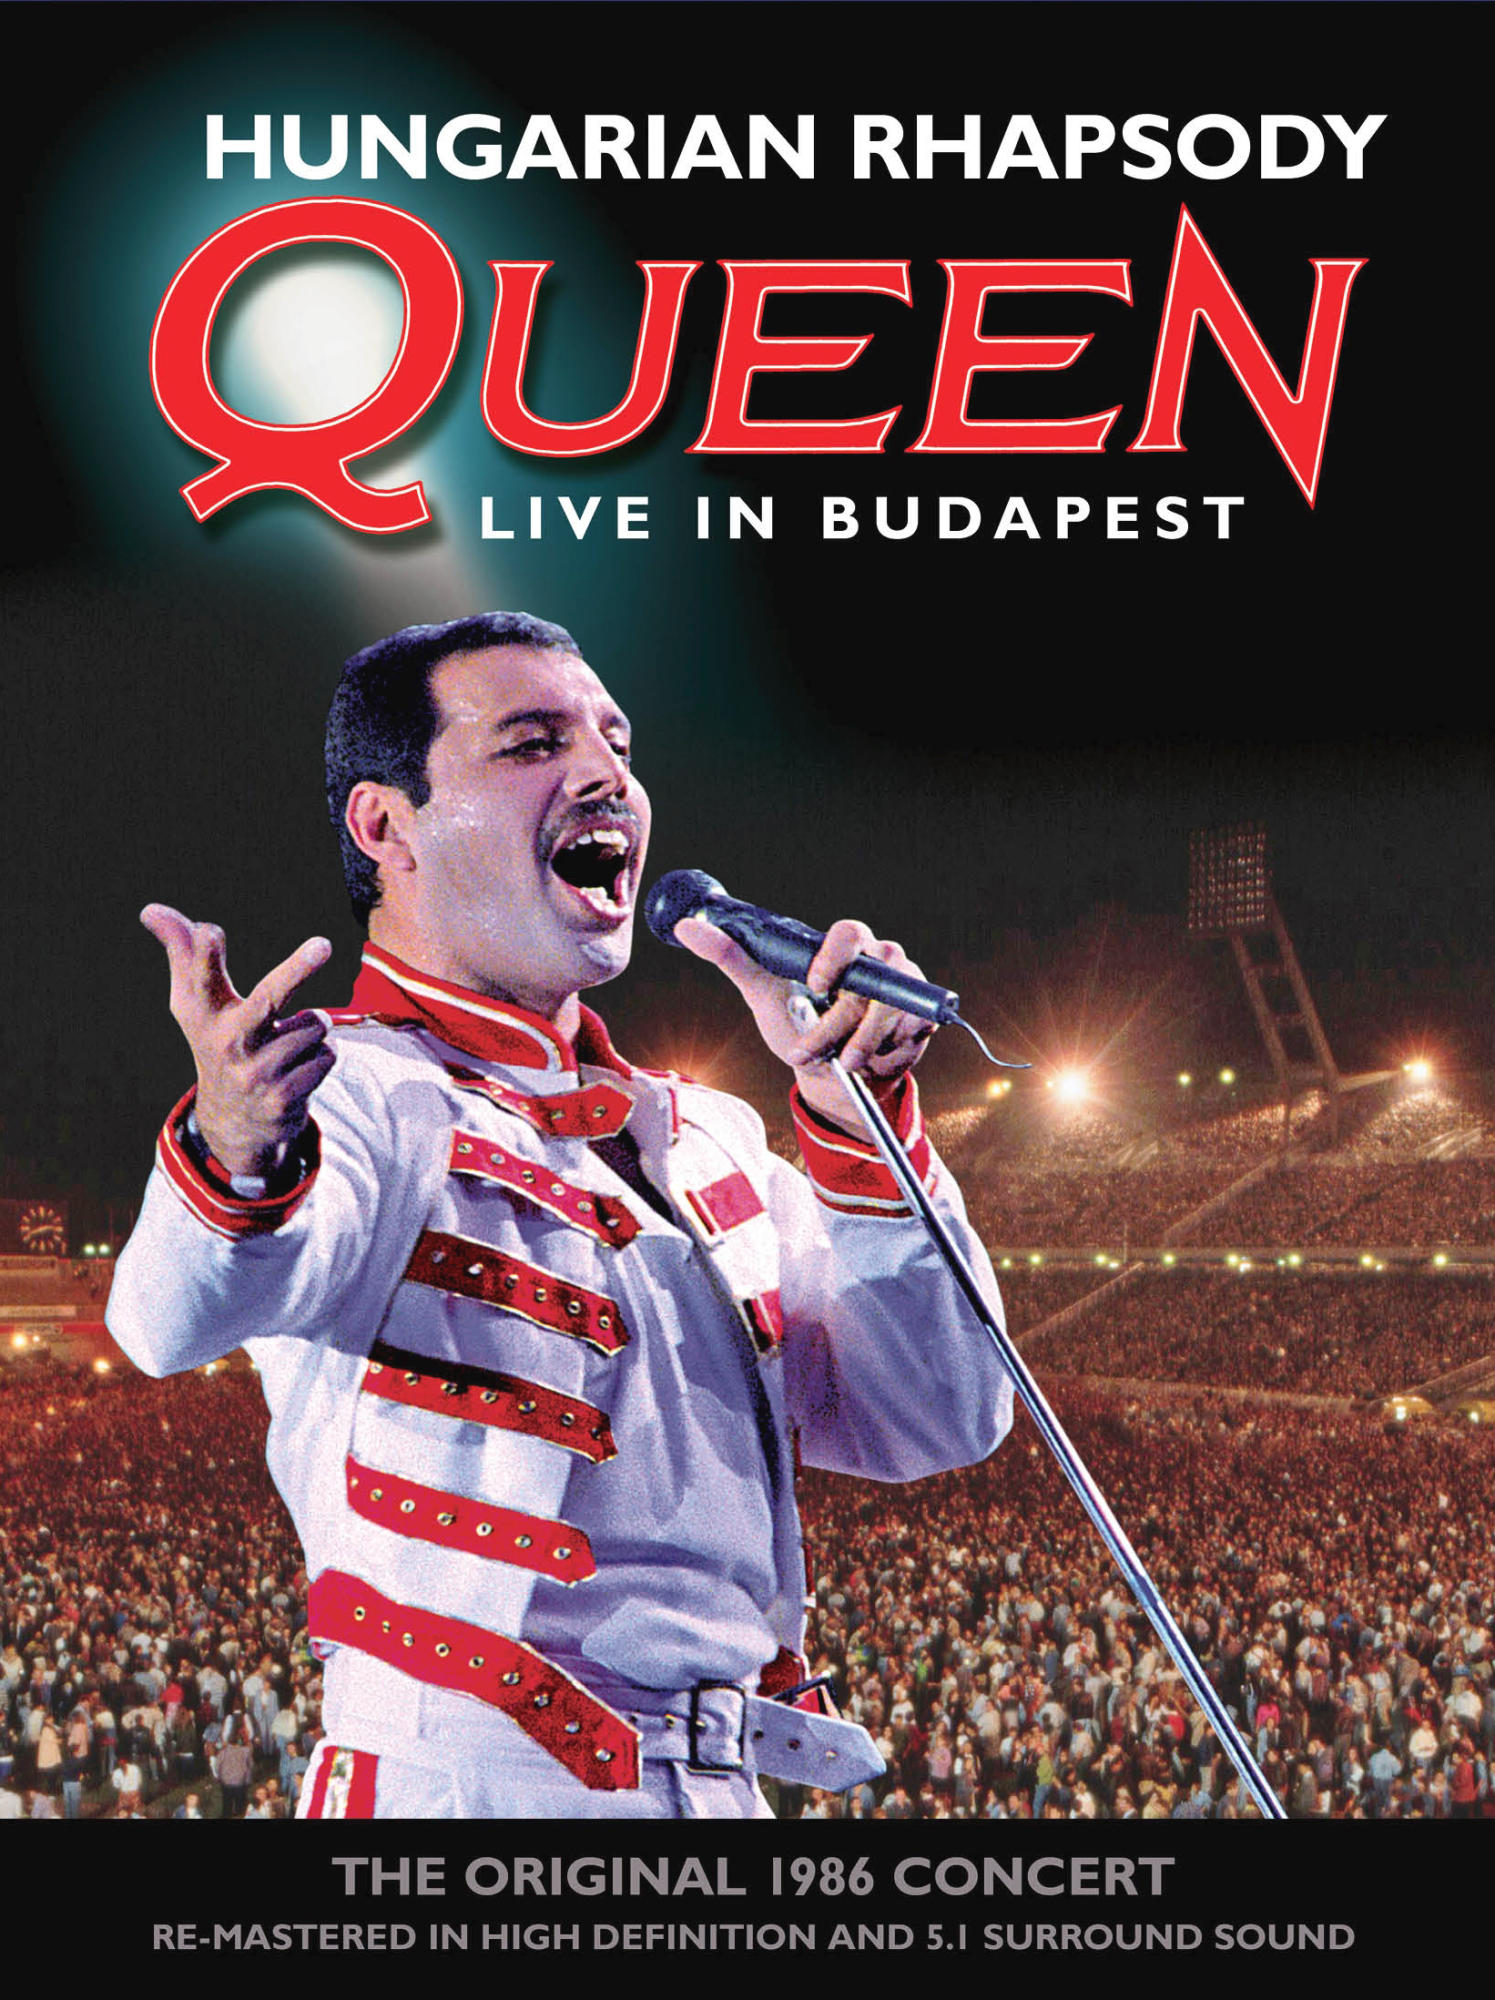 Queen - HUNGARIAN RHAPSODY - LIVE IN BUDAPEST (DVD) 